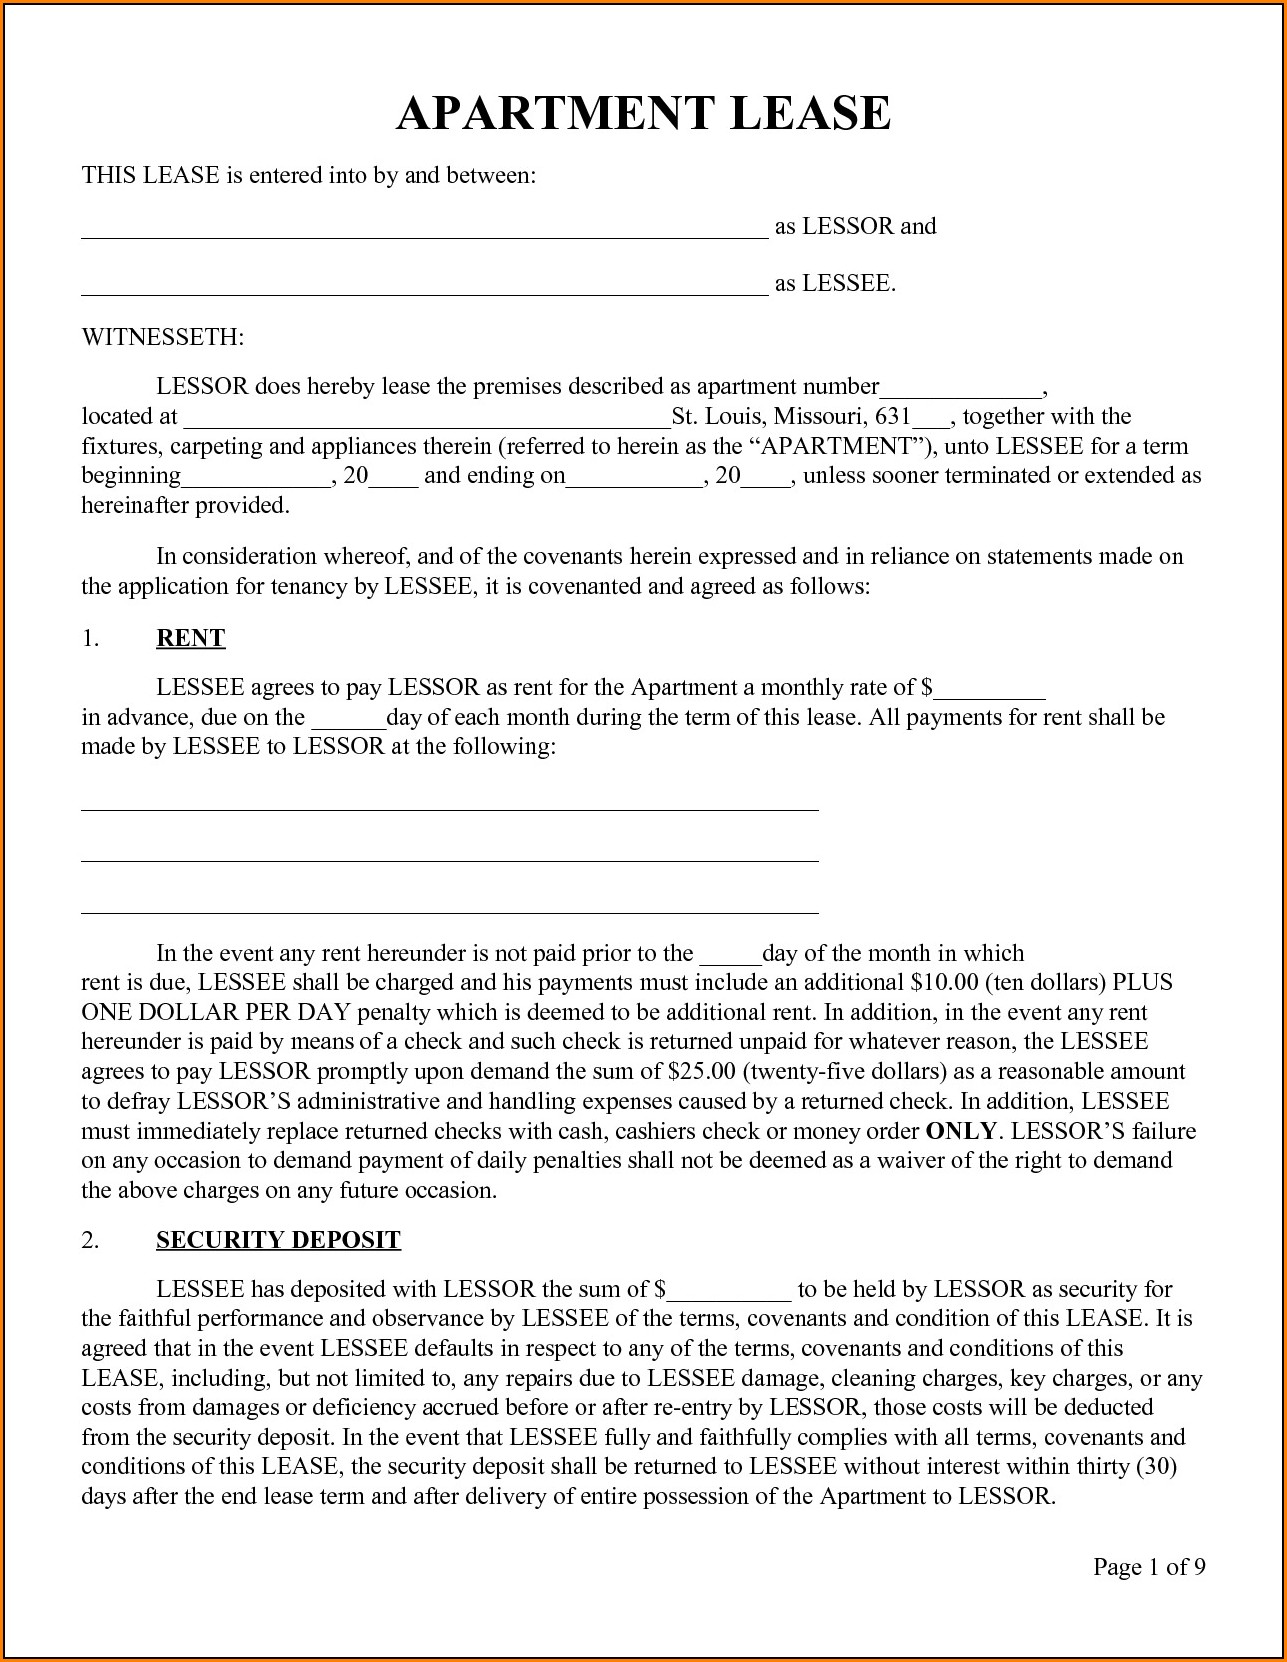 Blank Apartment Lease Form